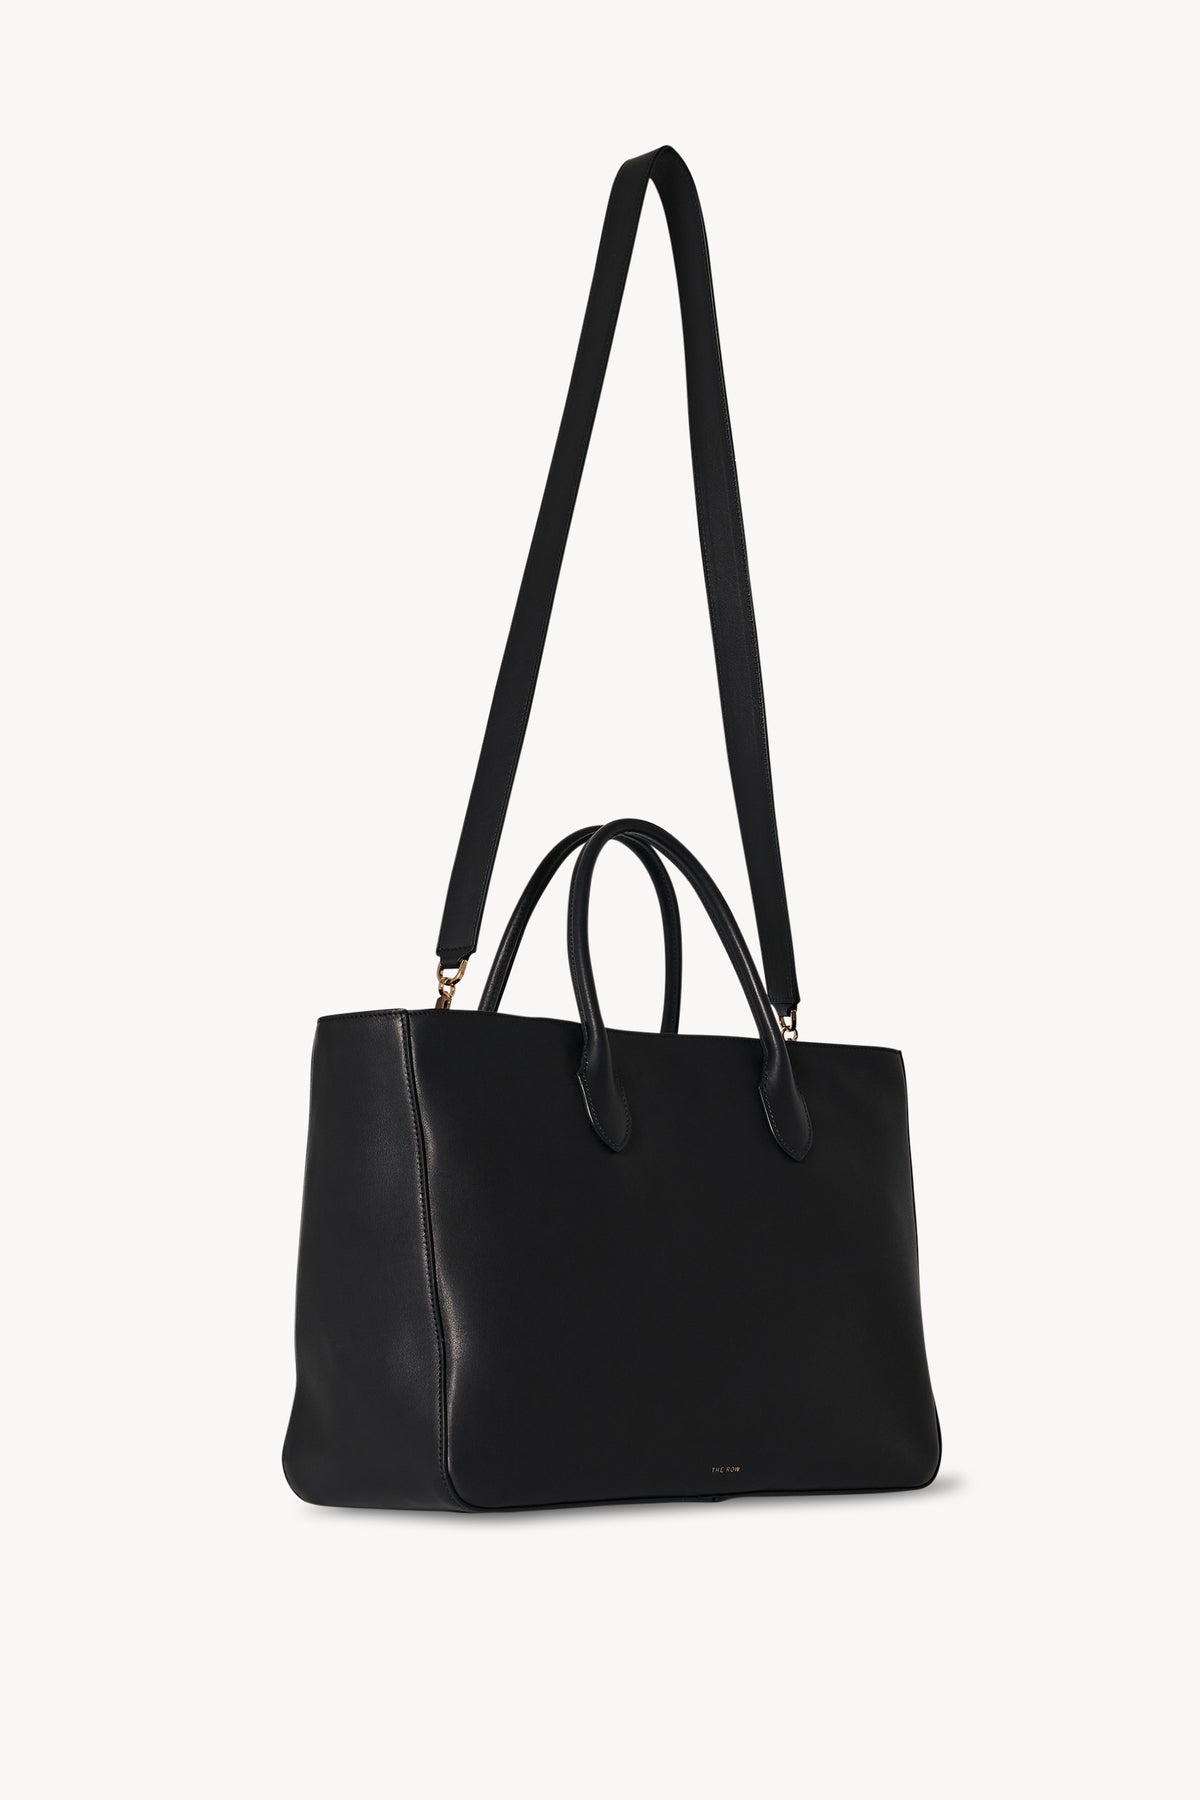 The Row Day Luxe Large Leather Tote - Black Totes, Handbags - THR112548